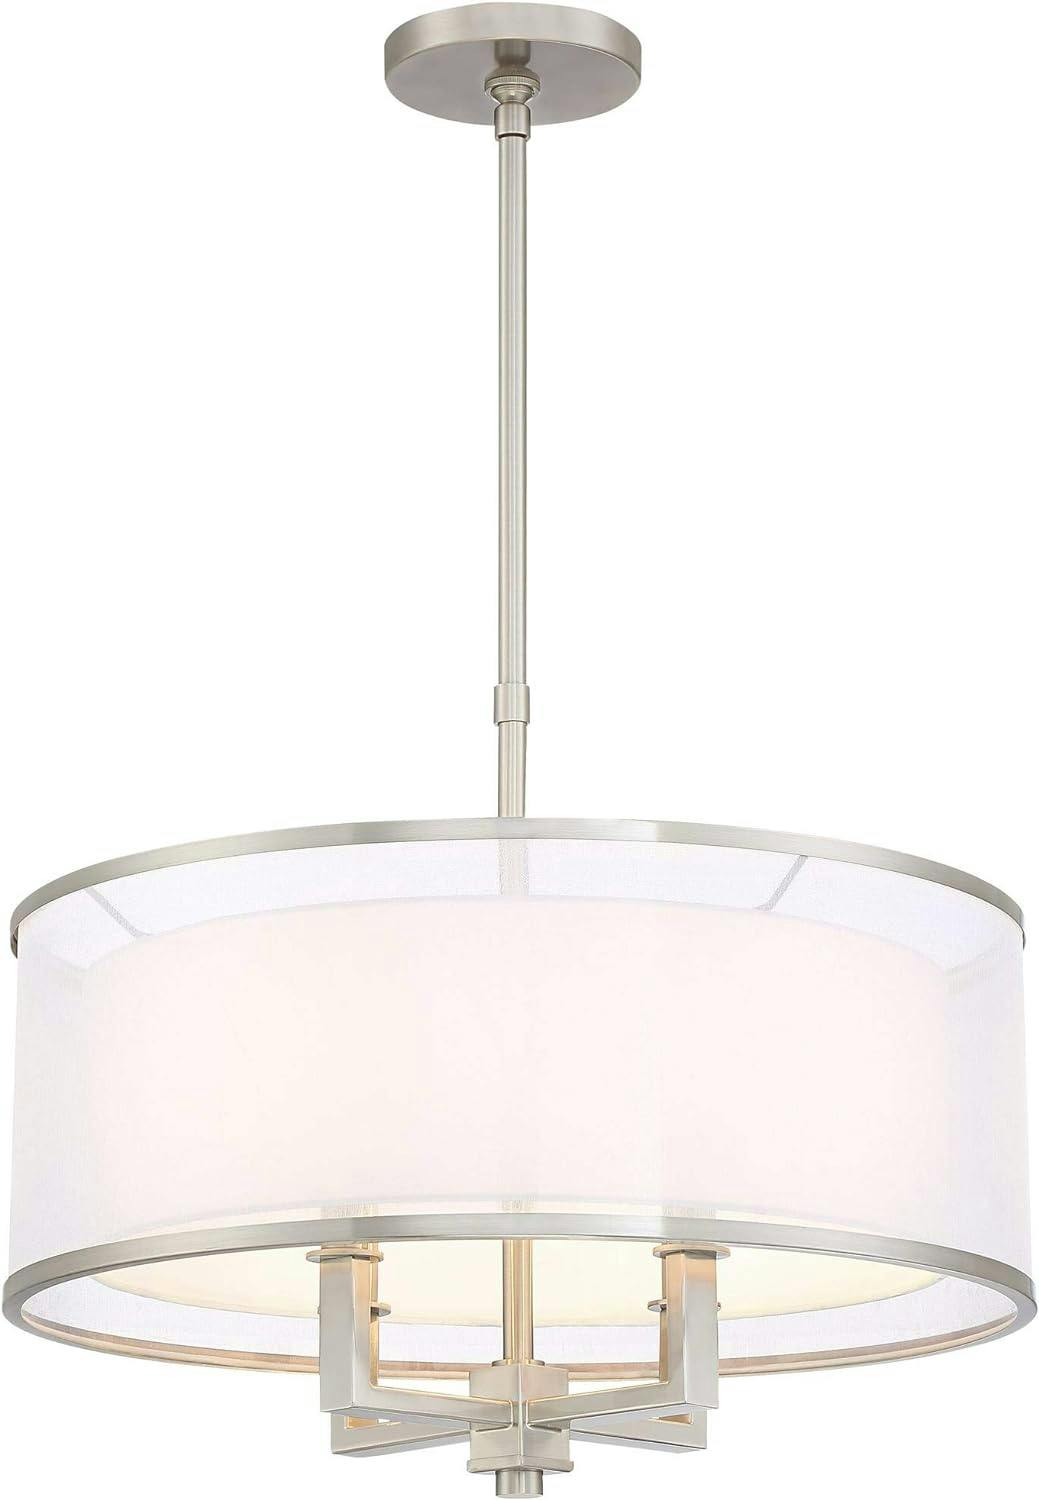 Elegant Brushed Nickel 23" Drum Pendant with Silver Organza and White Linen Shade